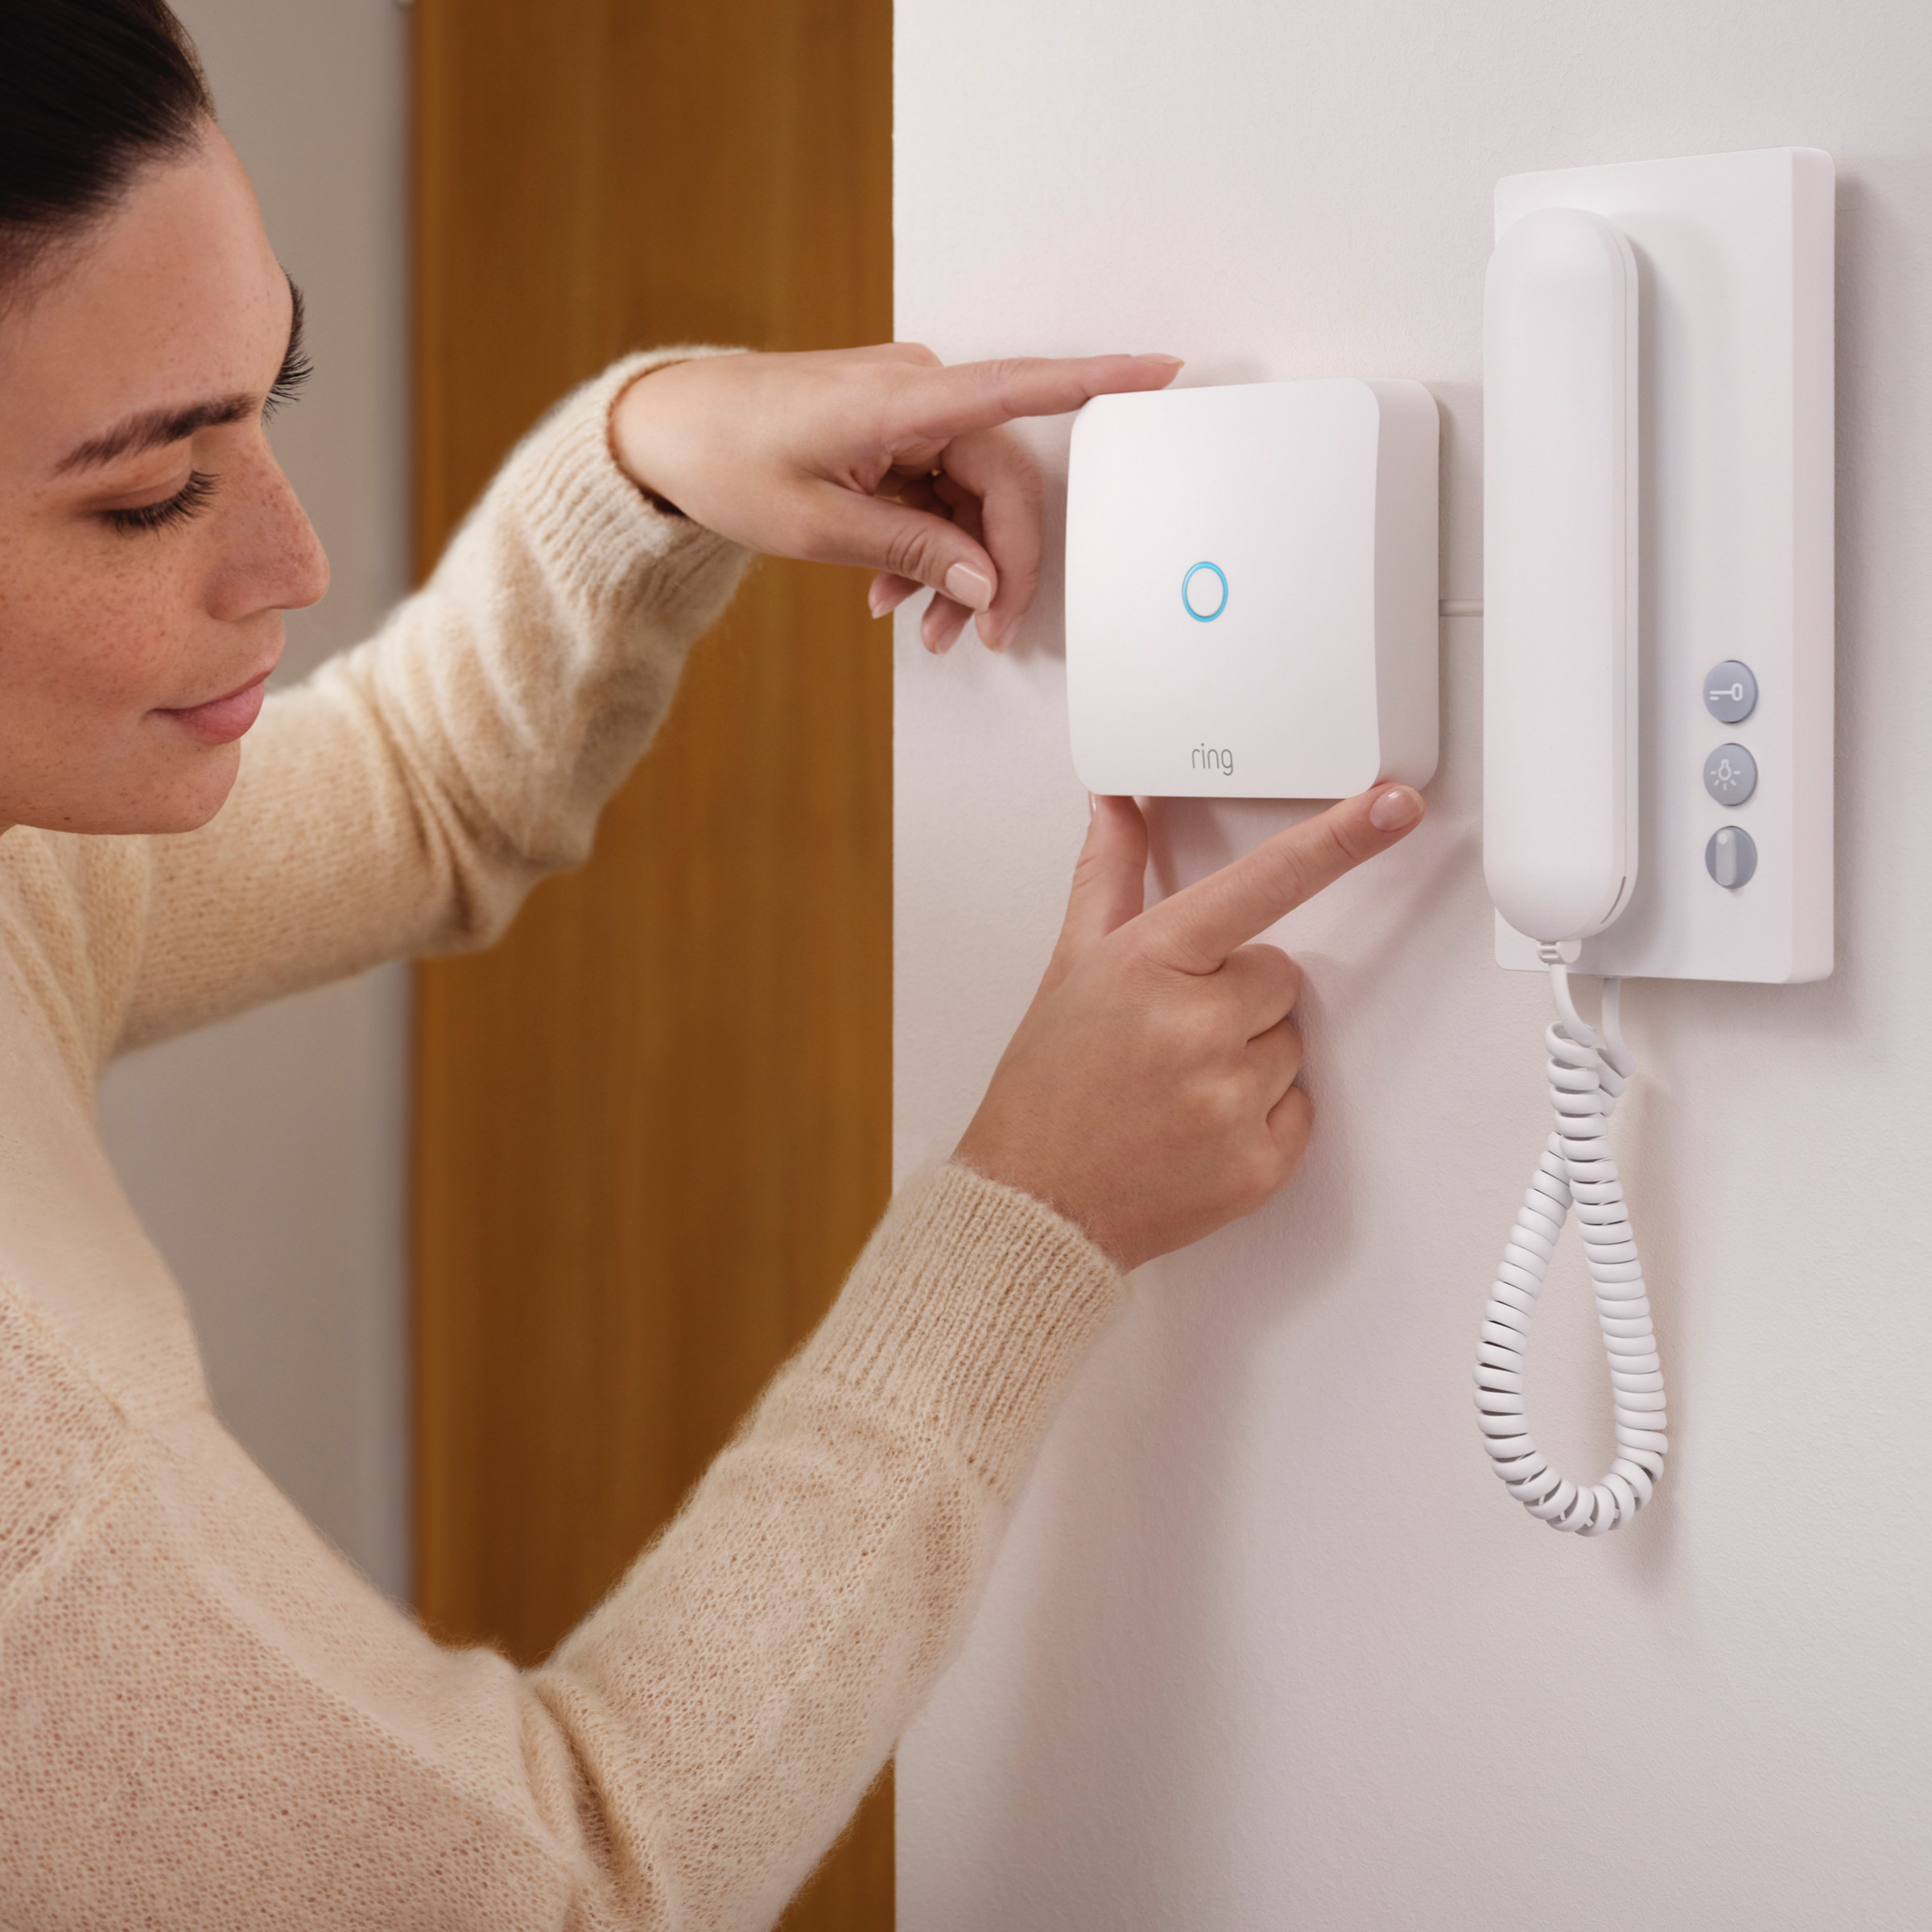 Ring Intercom installs next to your apartment's intercom handset and is battery-powered.